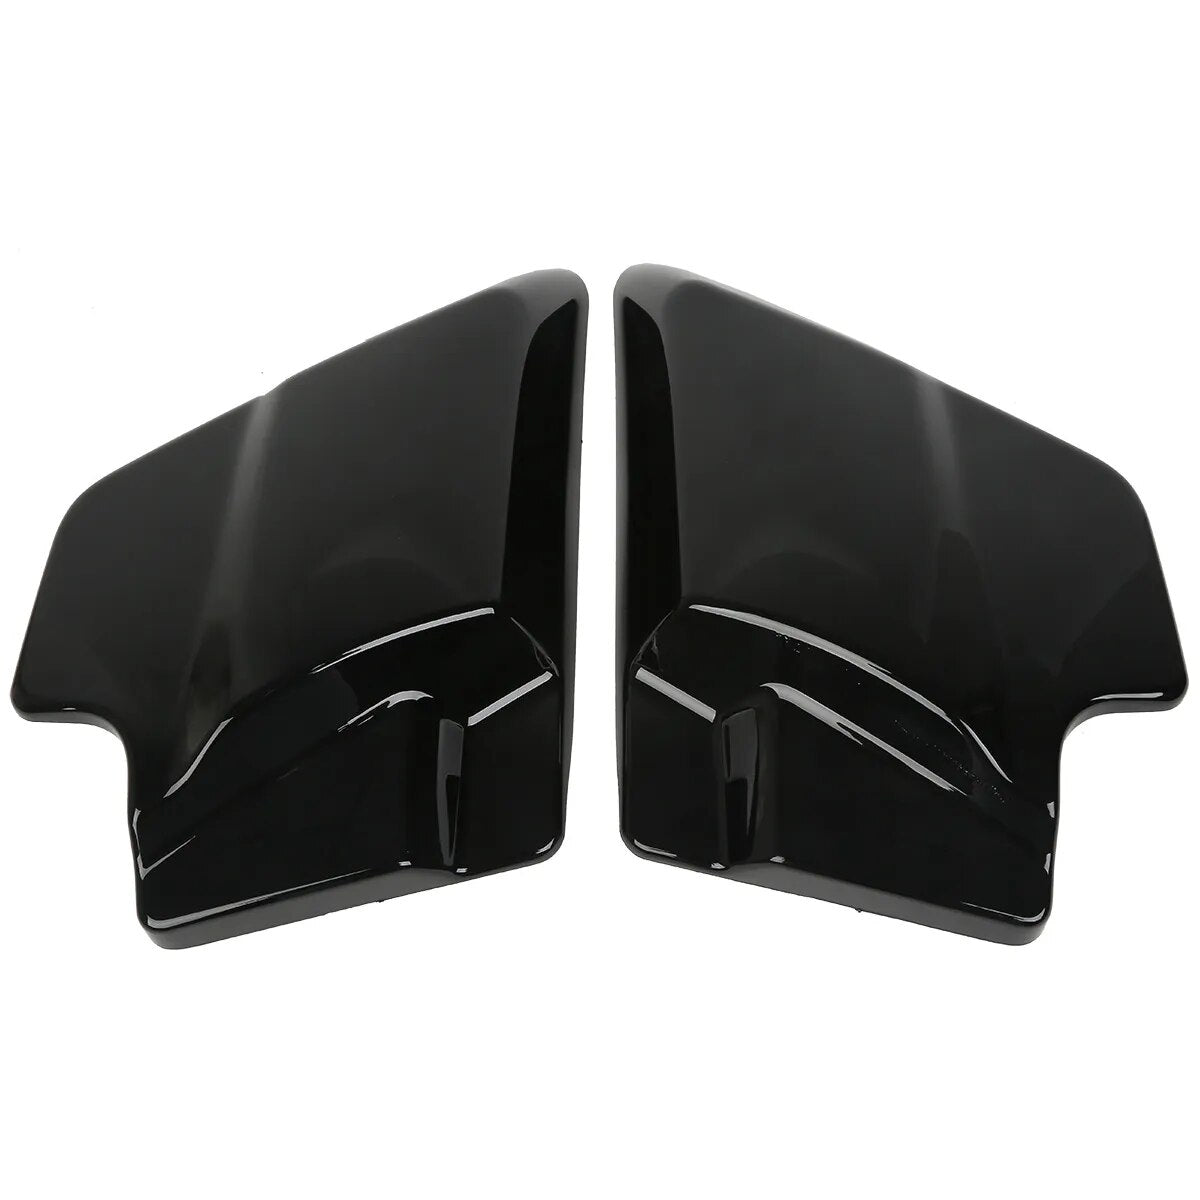 Voodoo Cycle House Side Covers For Harley-Davidson Touring Models Street Electra Glide Road King CVO 2009-UP